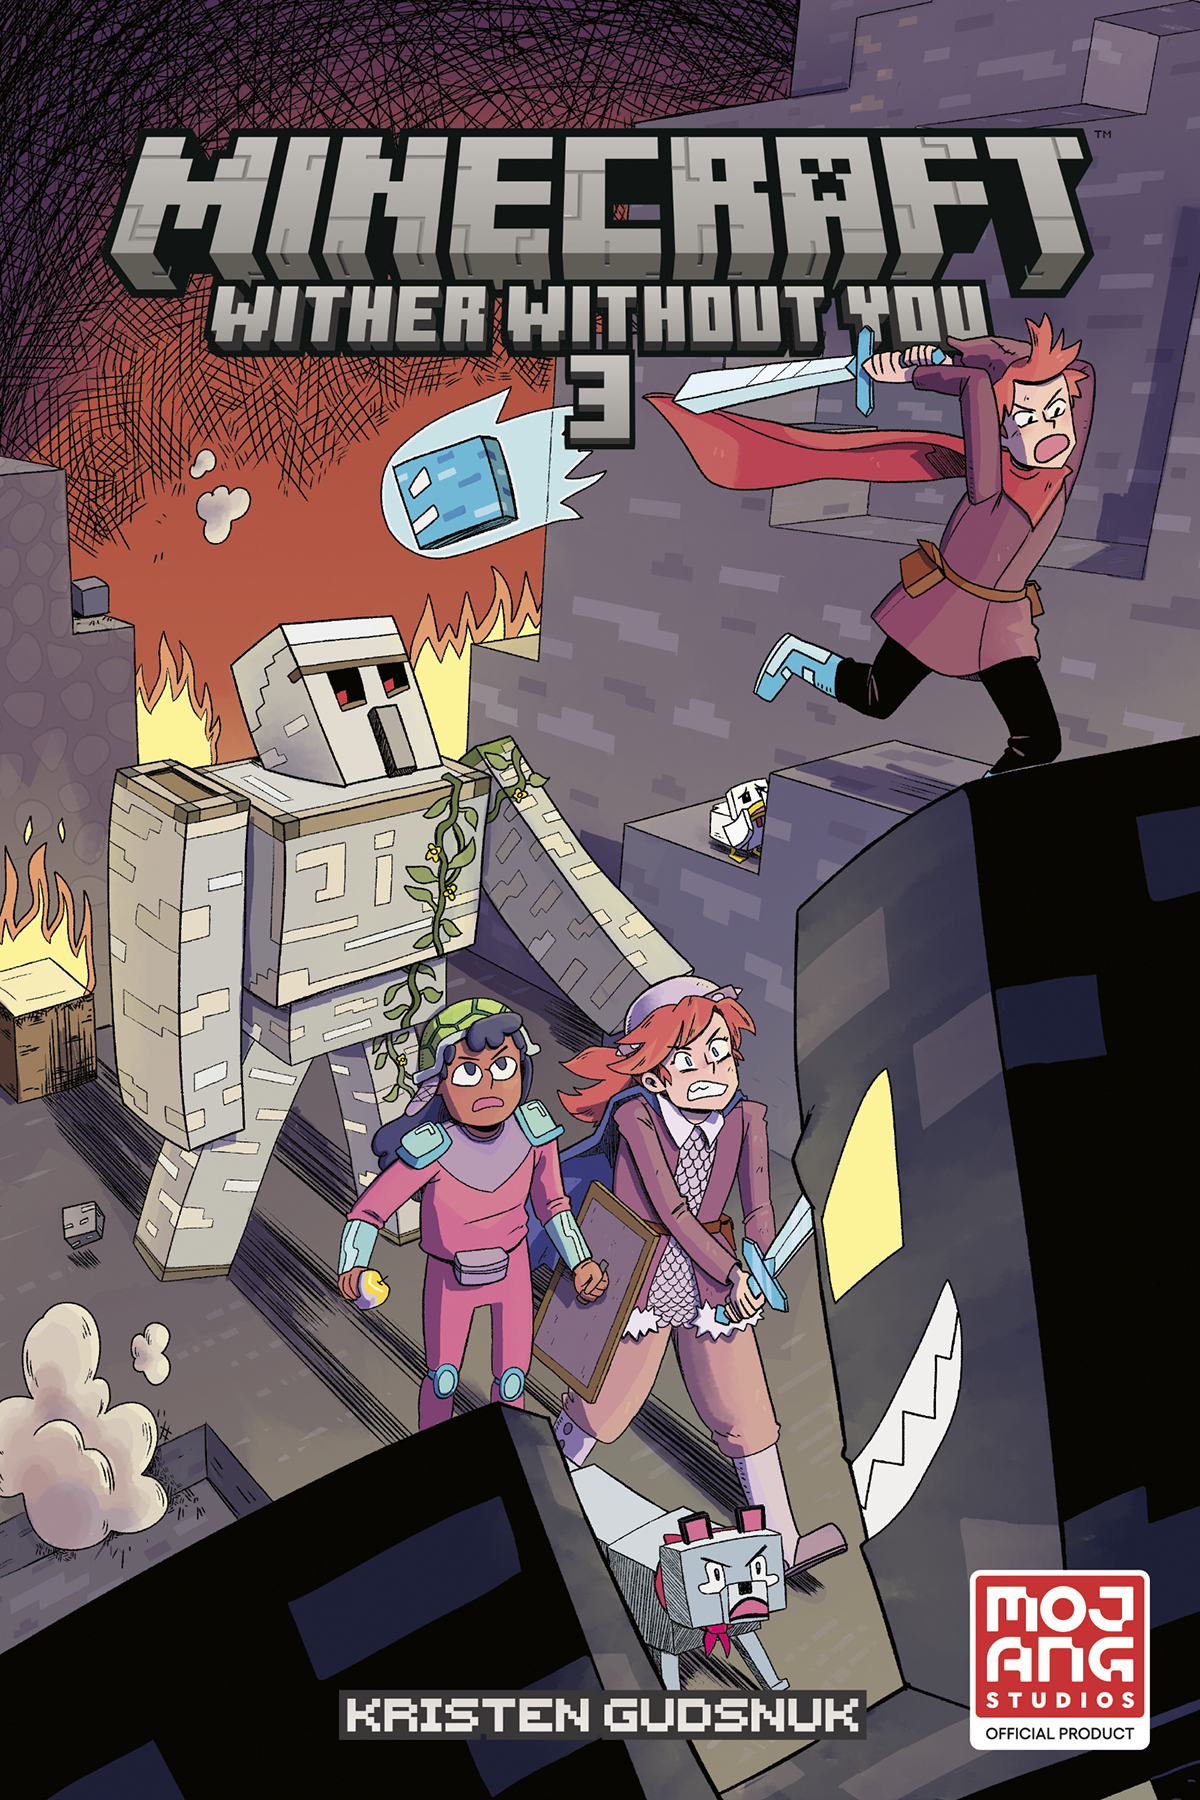 Minecraft Wither Without You Graphic Novel Volume 3